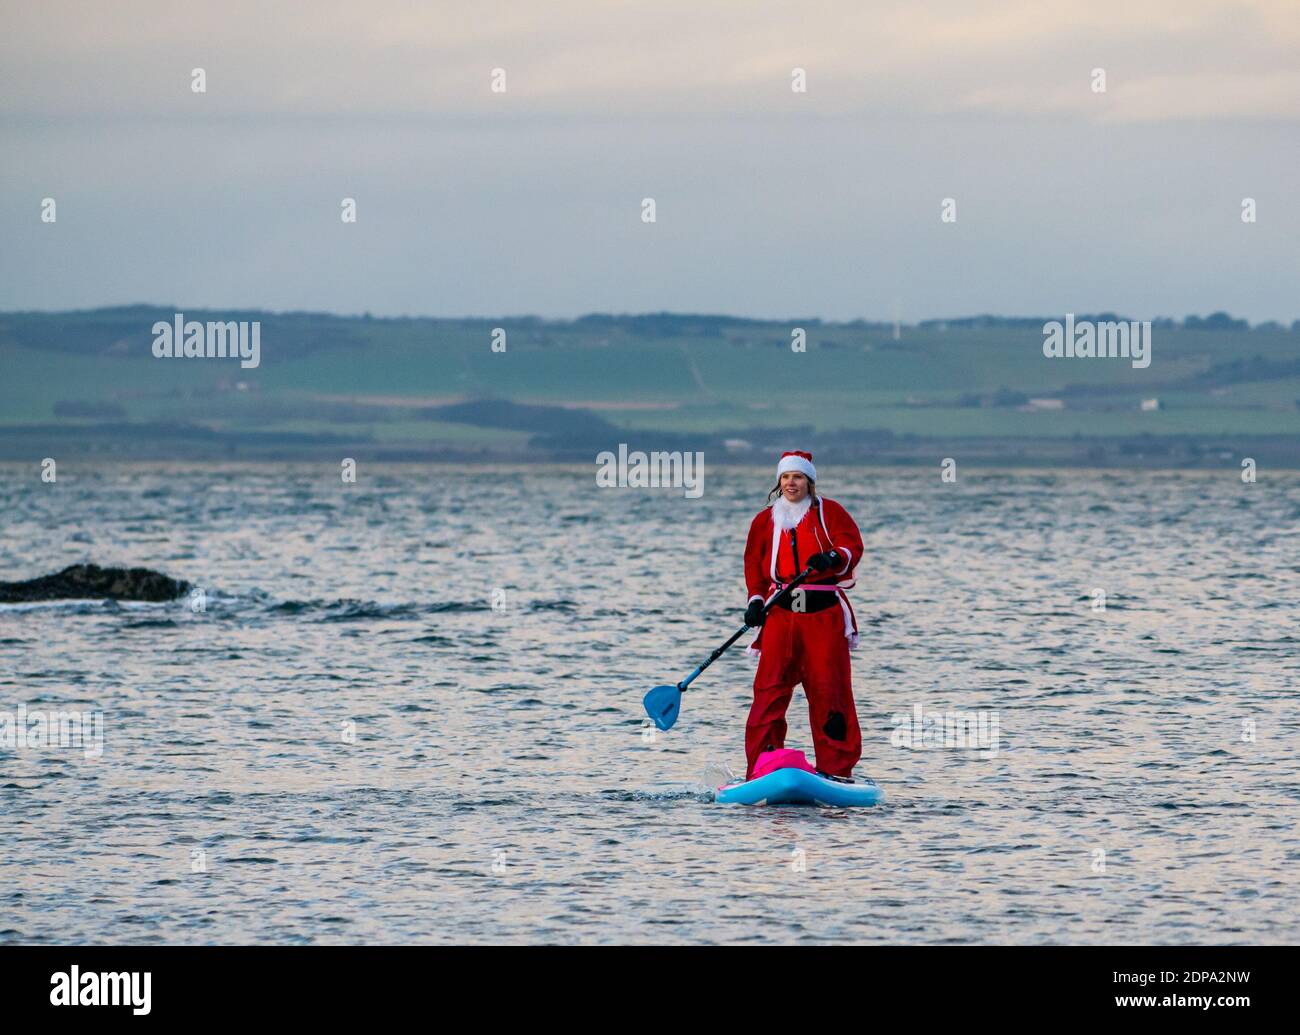 North Berwick, East Lothian, Scotland, United Kingdom, 19th December 2020. Paddle Boarding Santas for charity: a local community initiative by North Berwick News and Views called 'Christmas Cheer' raises over £5,000 funds for families in need. A paddle boarder dressed in a Santa costume Stock Photo